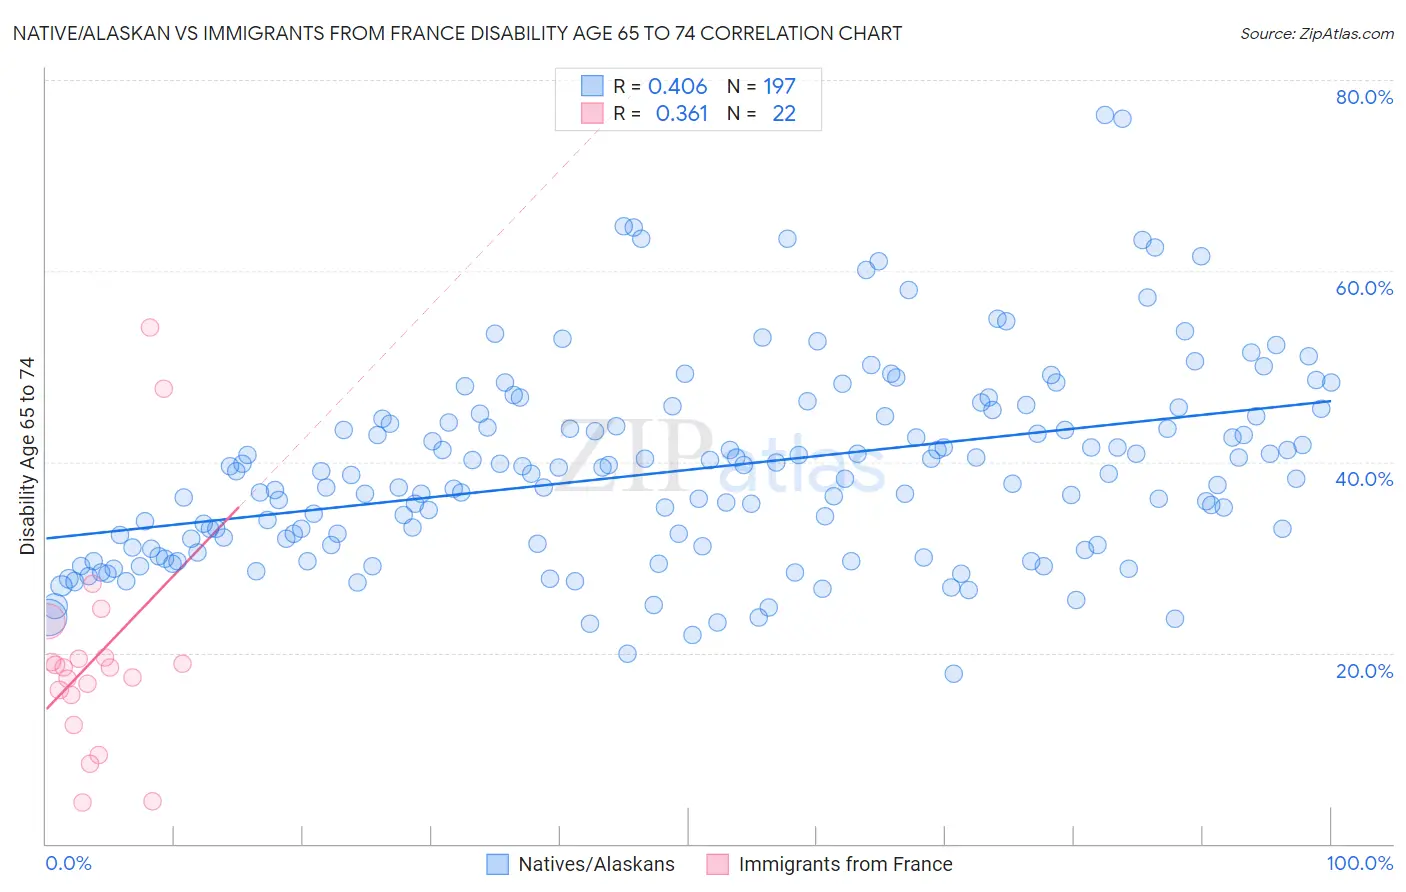 Native/Alaskan vs Immigrants from France Disability Age 65 to 74